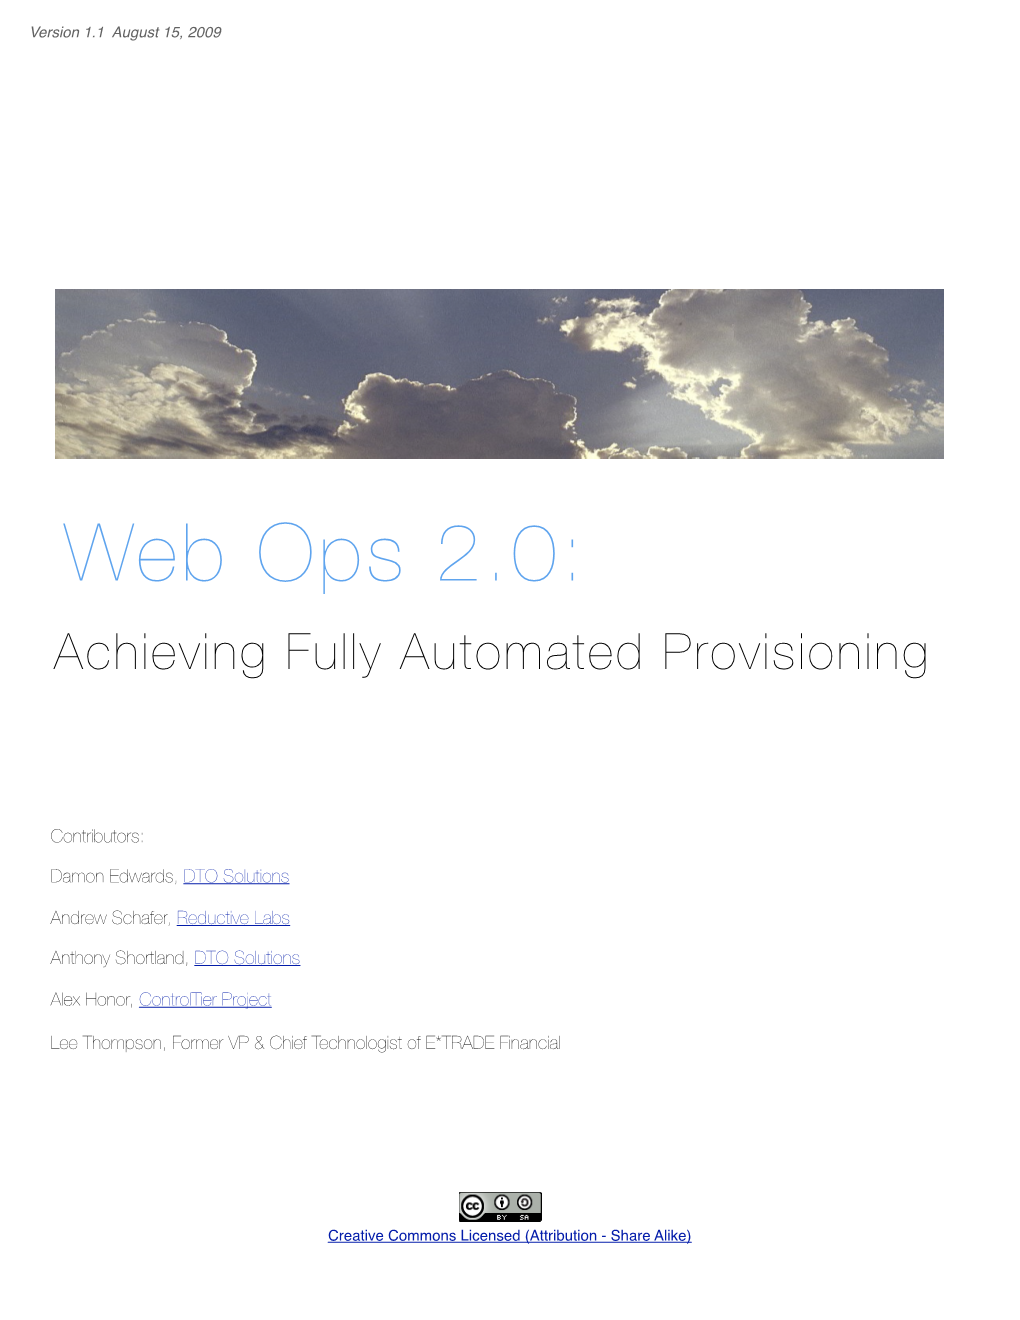 Web Ops 2.0: Achieving Fully Automated Provisioning